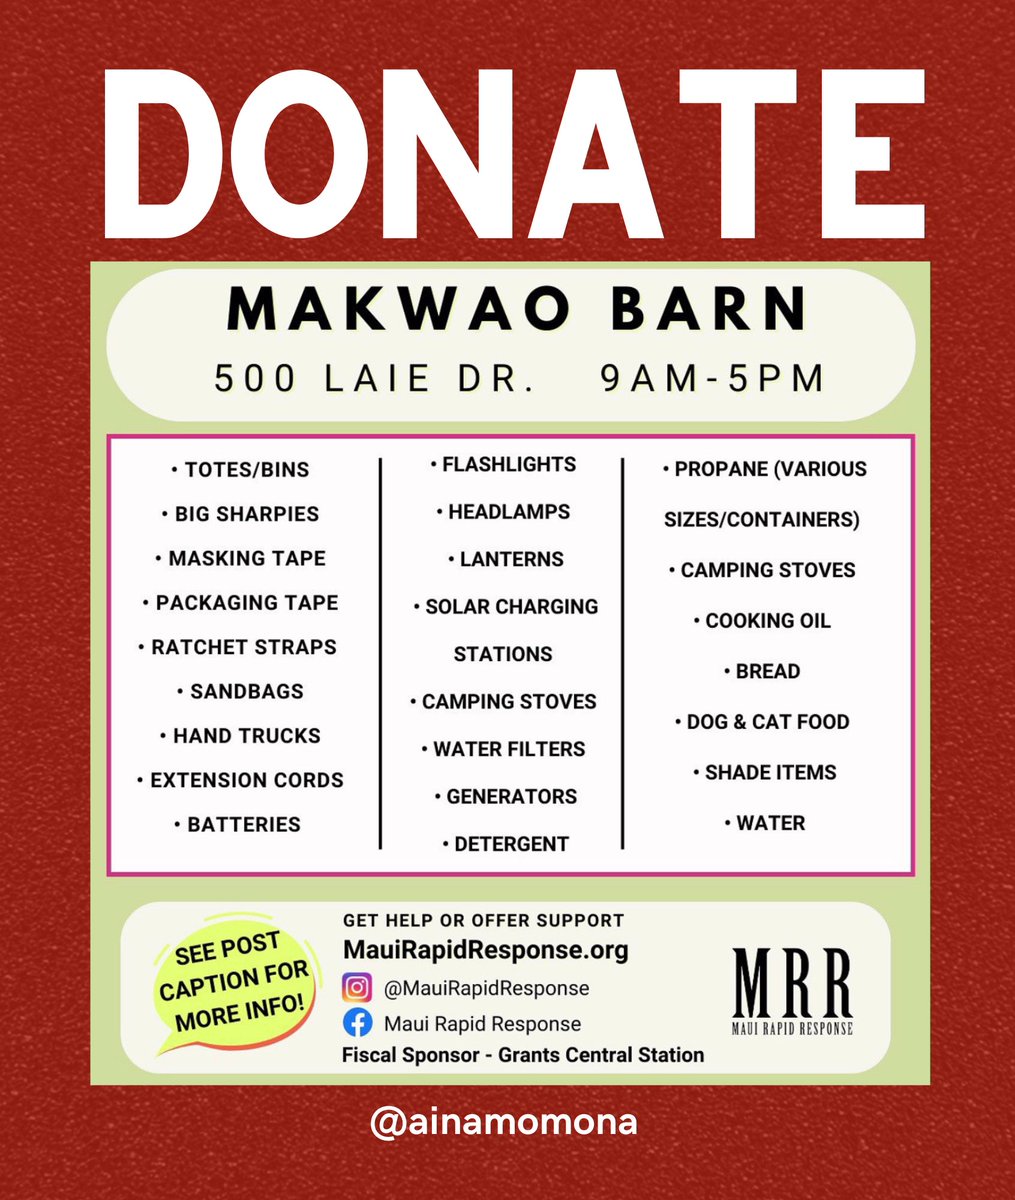 Despite everything that’s happened, kānaka and locals have led recovery efforts and support to those displaced by the Maui Wildfires more than the national guard, federal emergency agencies and local government. Want to help Maui and families in need? Bit.ly/ainamomona